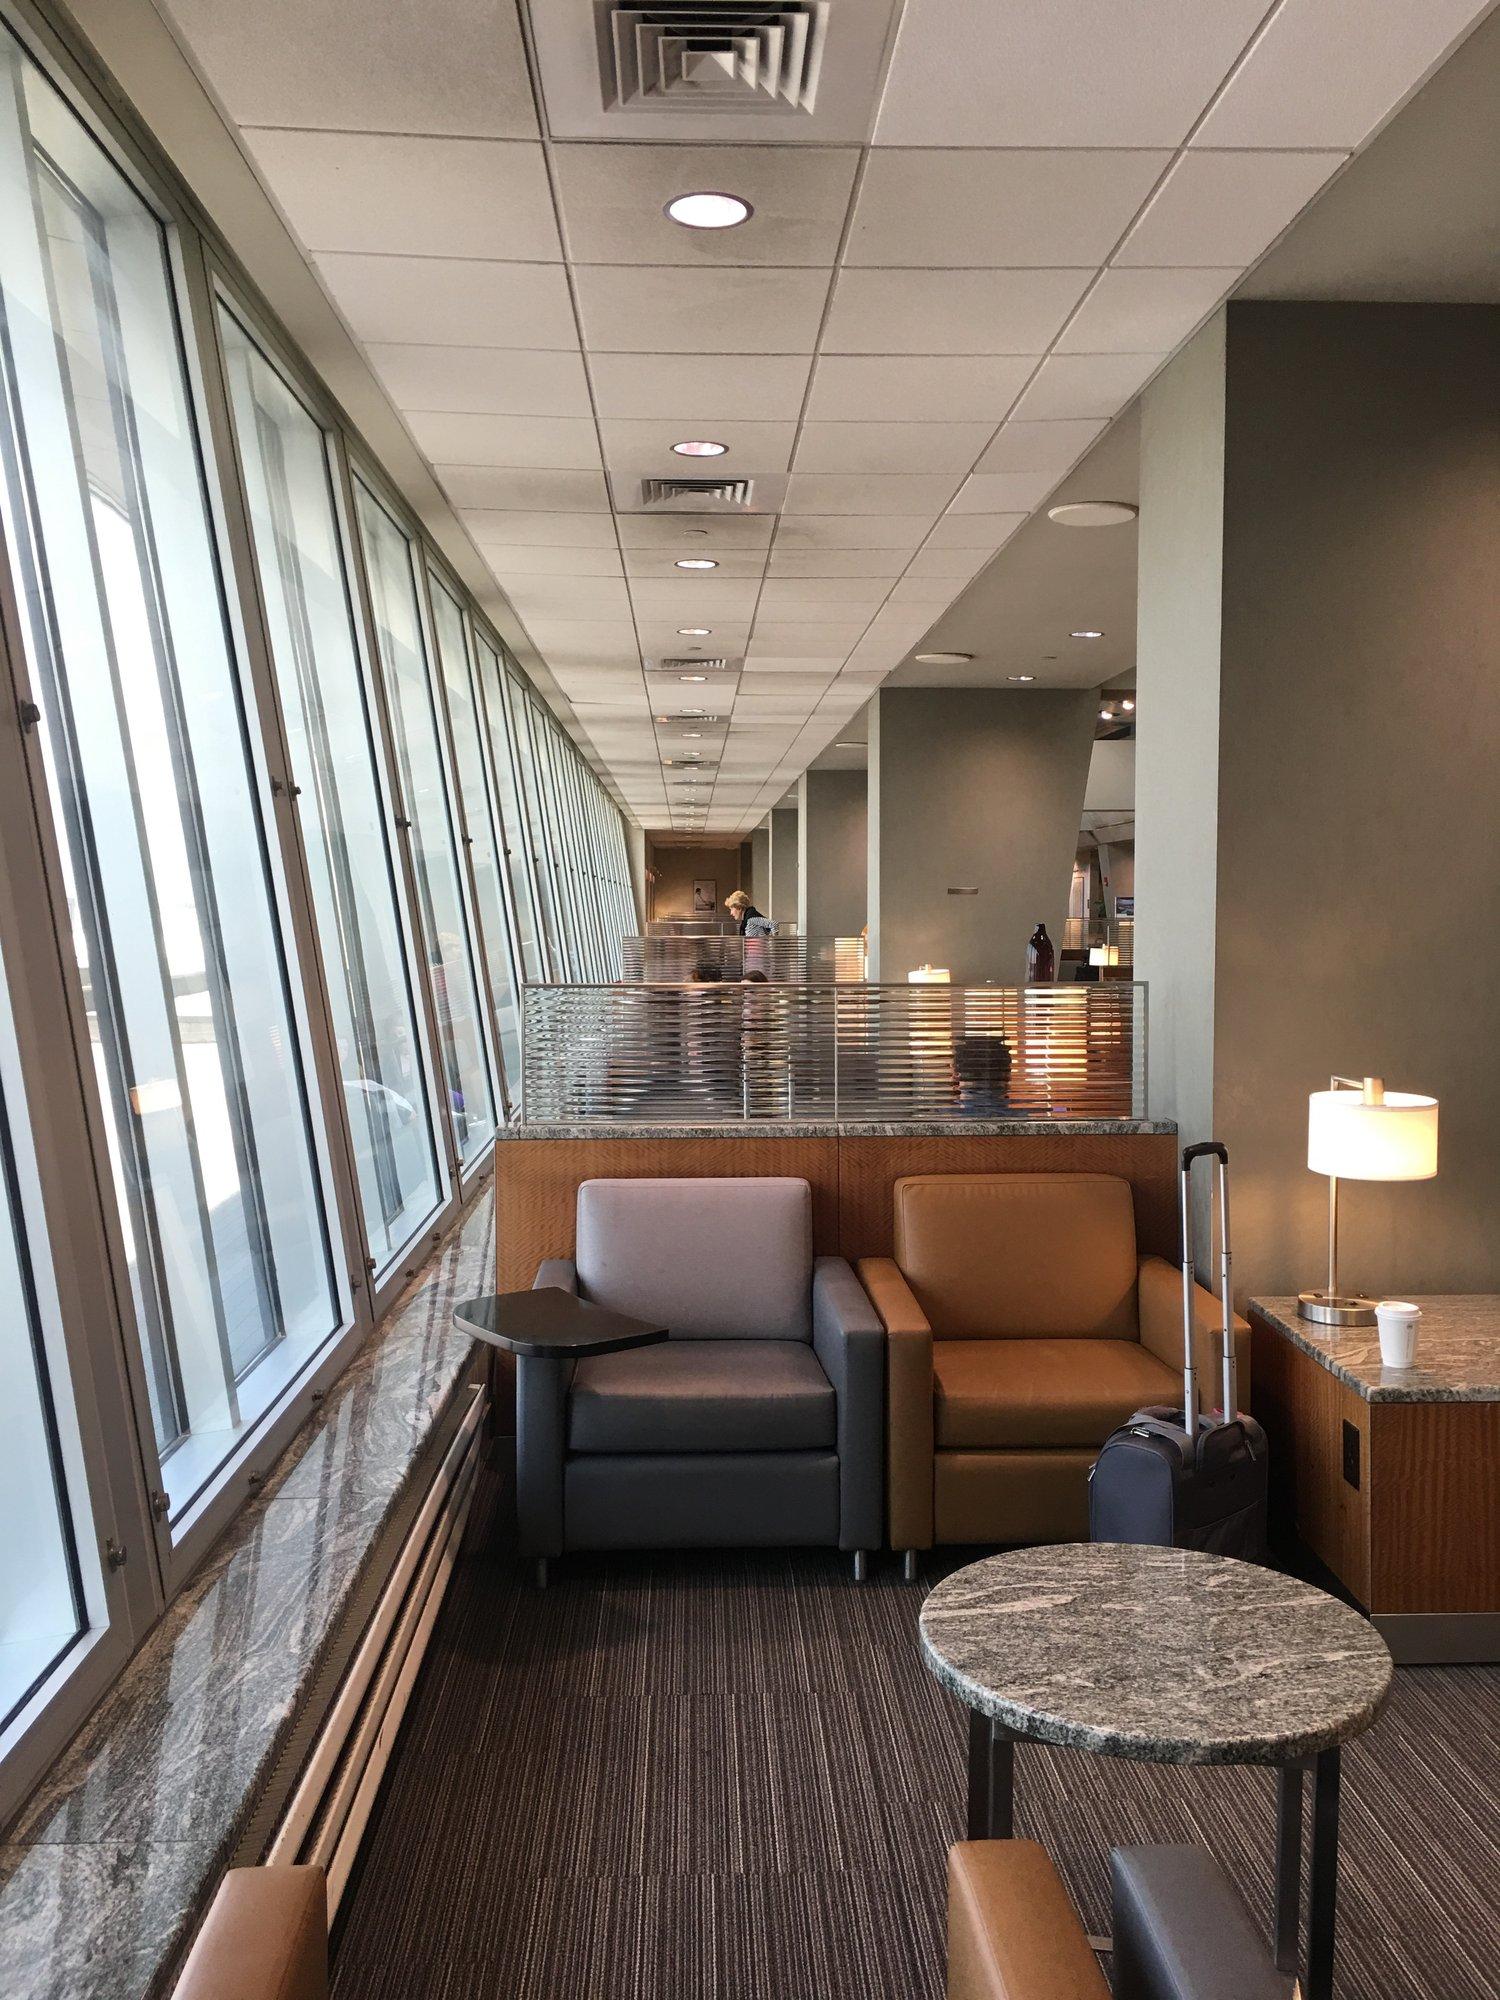 American Airlines Admirals Club image 20 of 48